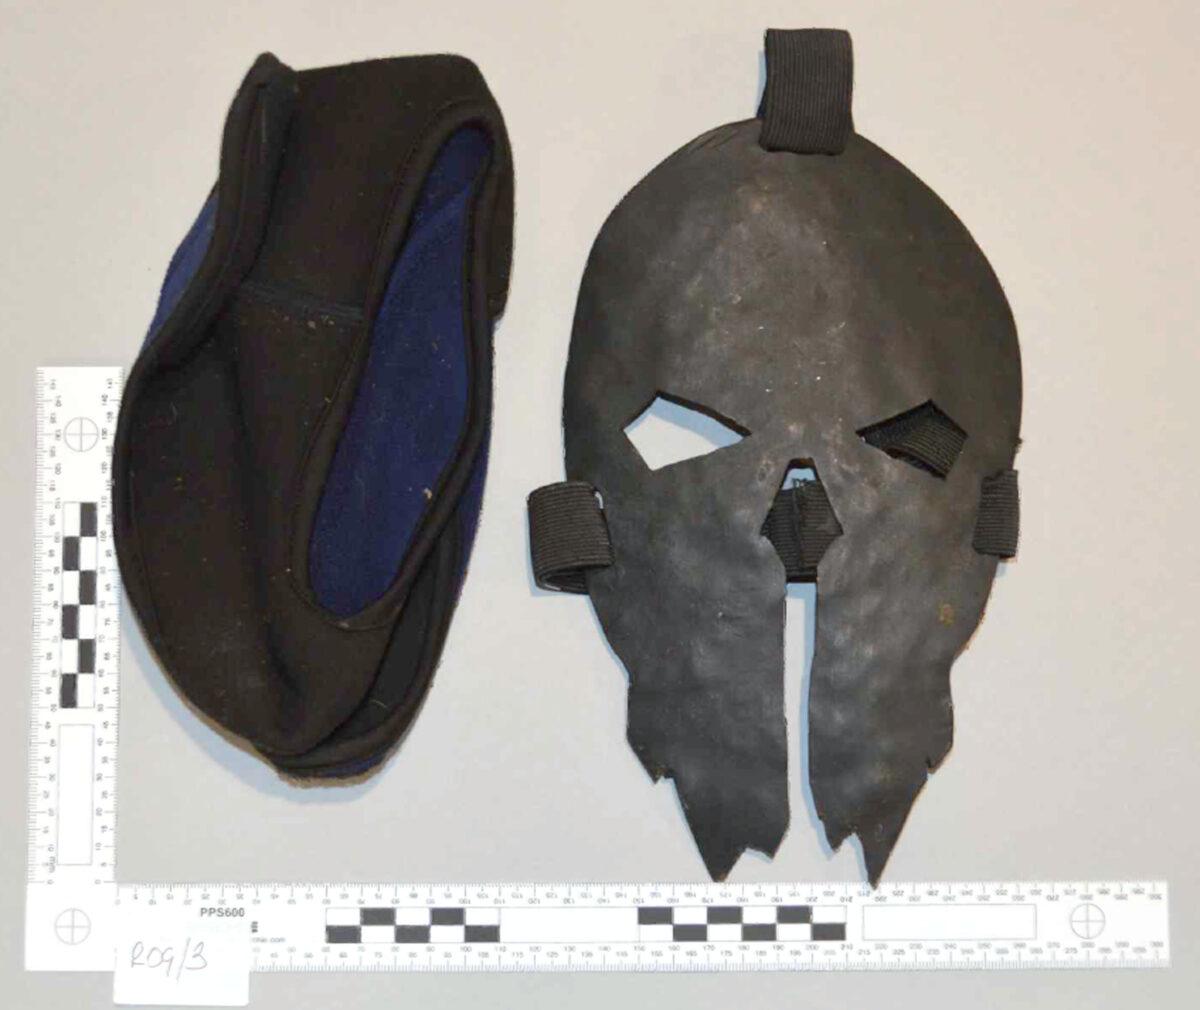 Undated photo of a mask that Jaswant Singh Chail was wearing when he was arrested in the grounds of Windsor Castle in Berkshire, United Kingdom, on Dec. 25, 2021. (CPS)